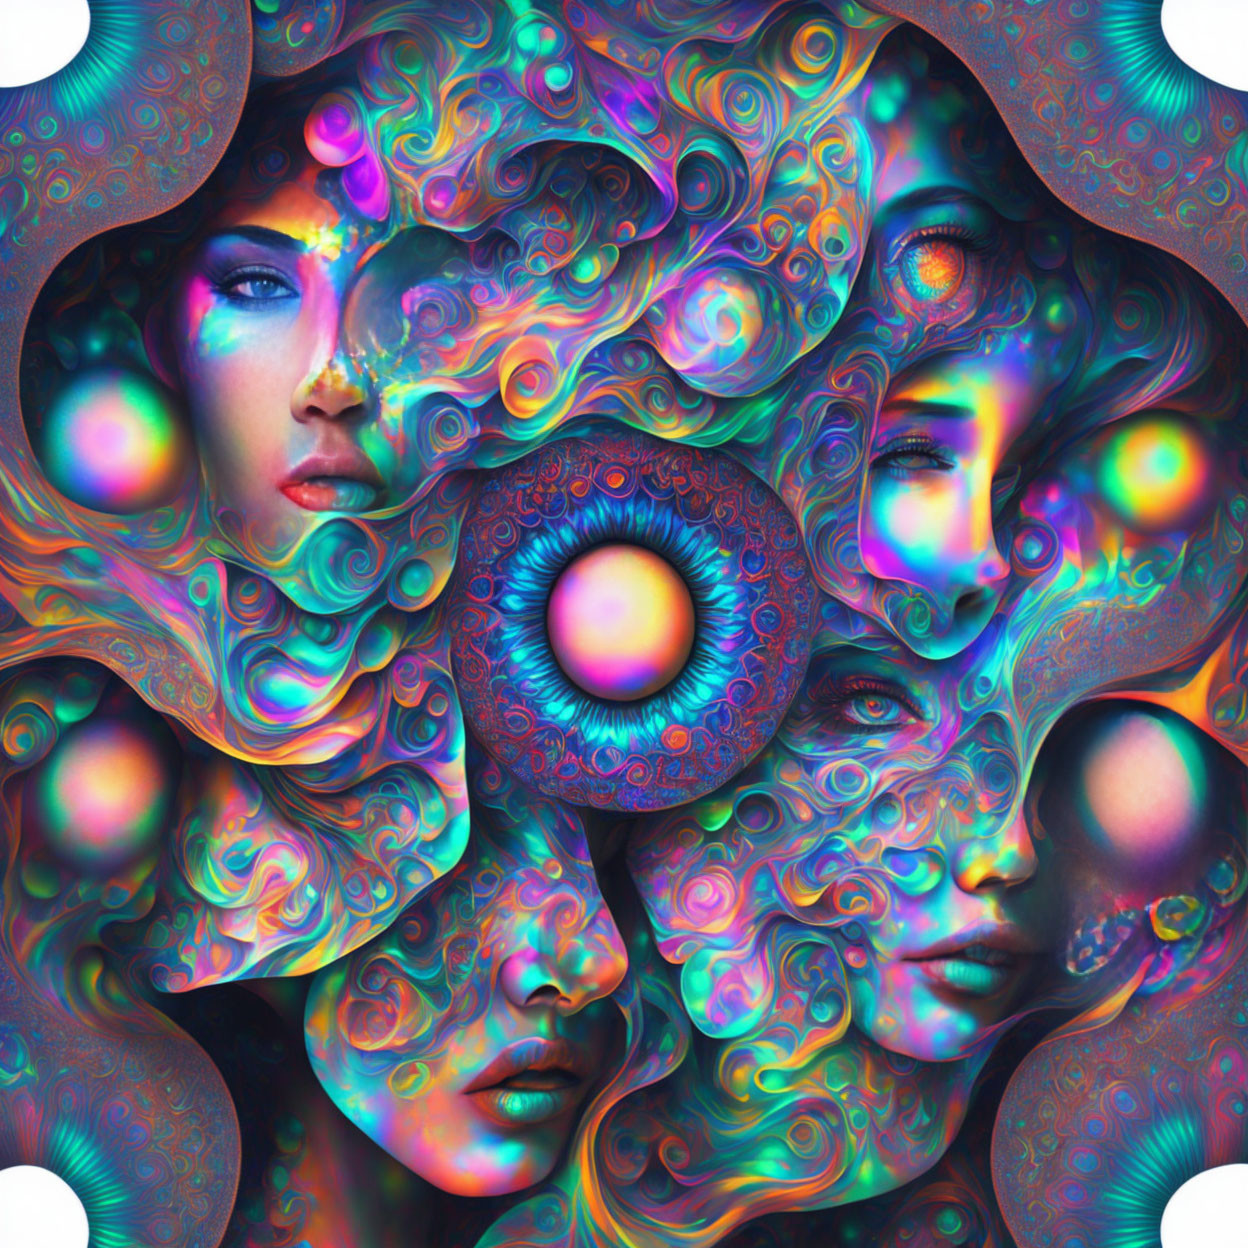 Abstract Psychedelic Digital Artwork: Multiple Female Faces with Swirling Patterns and Central Eye